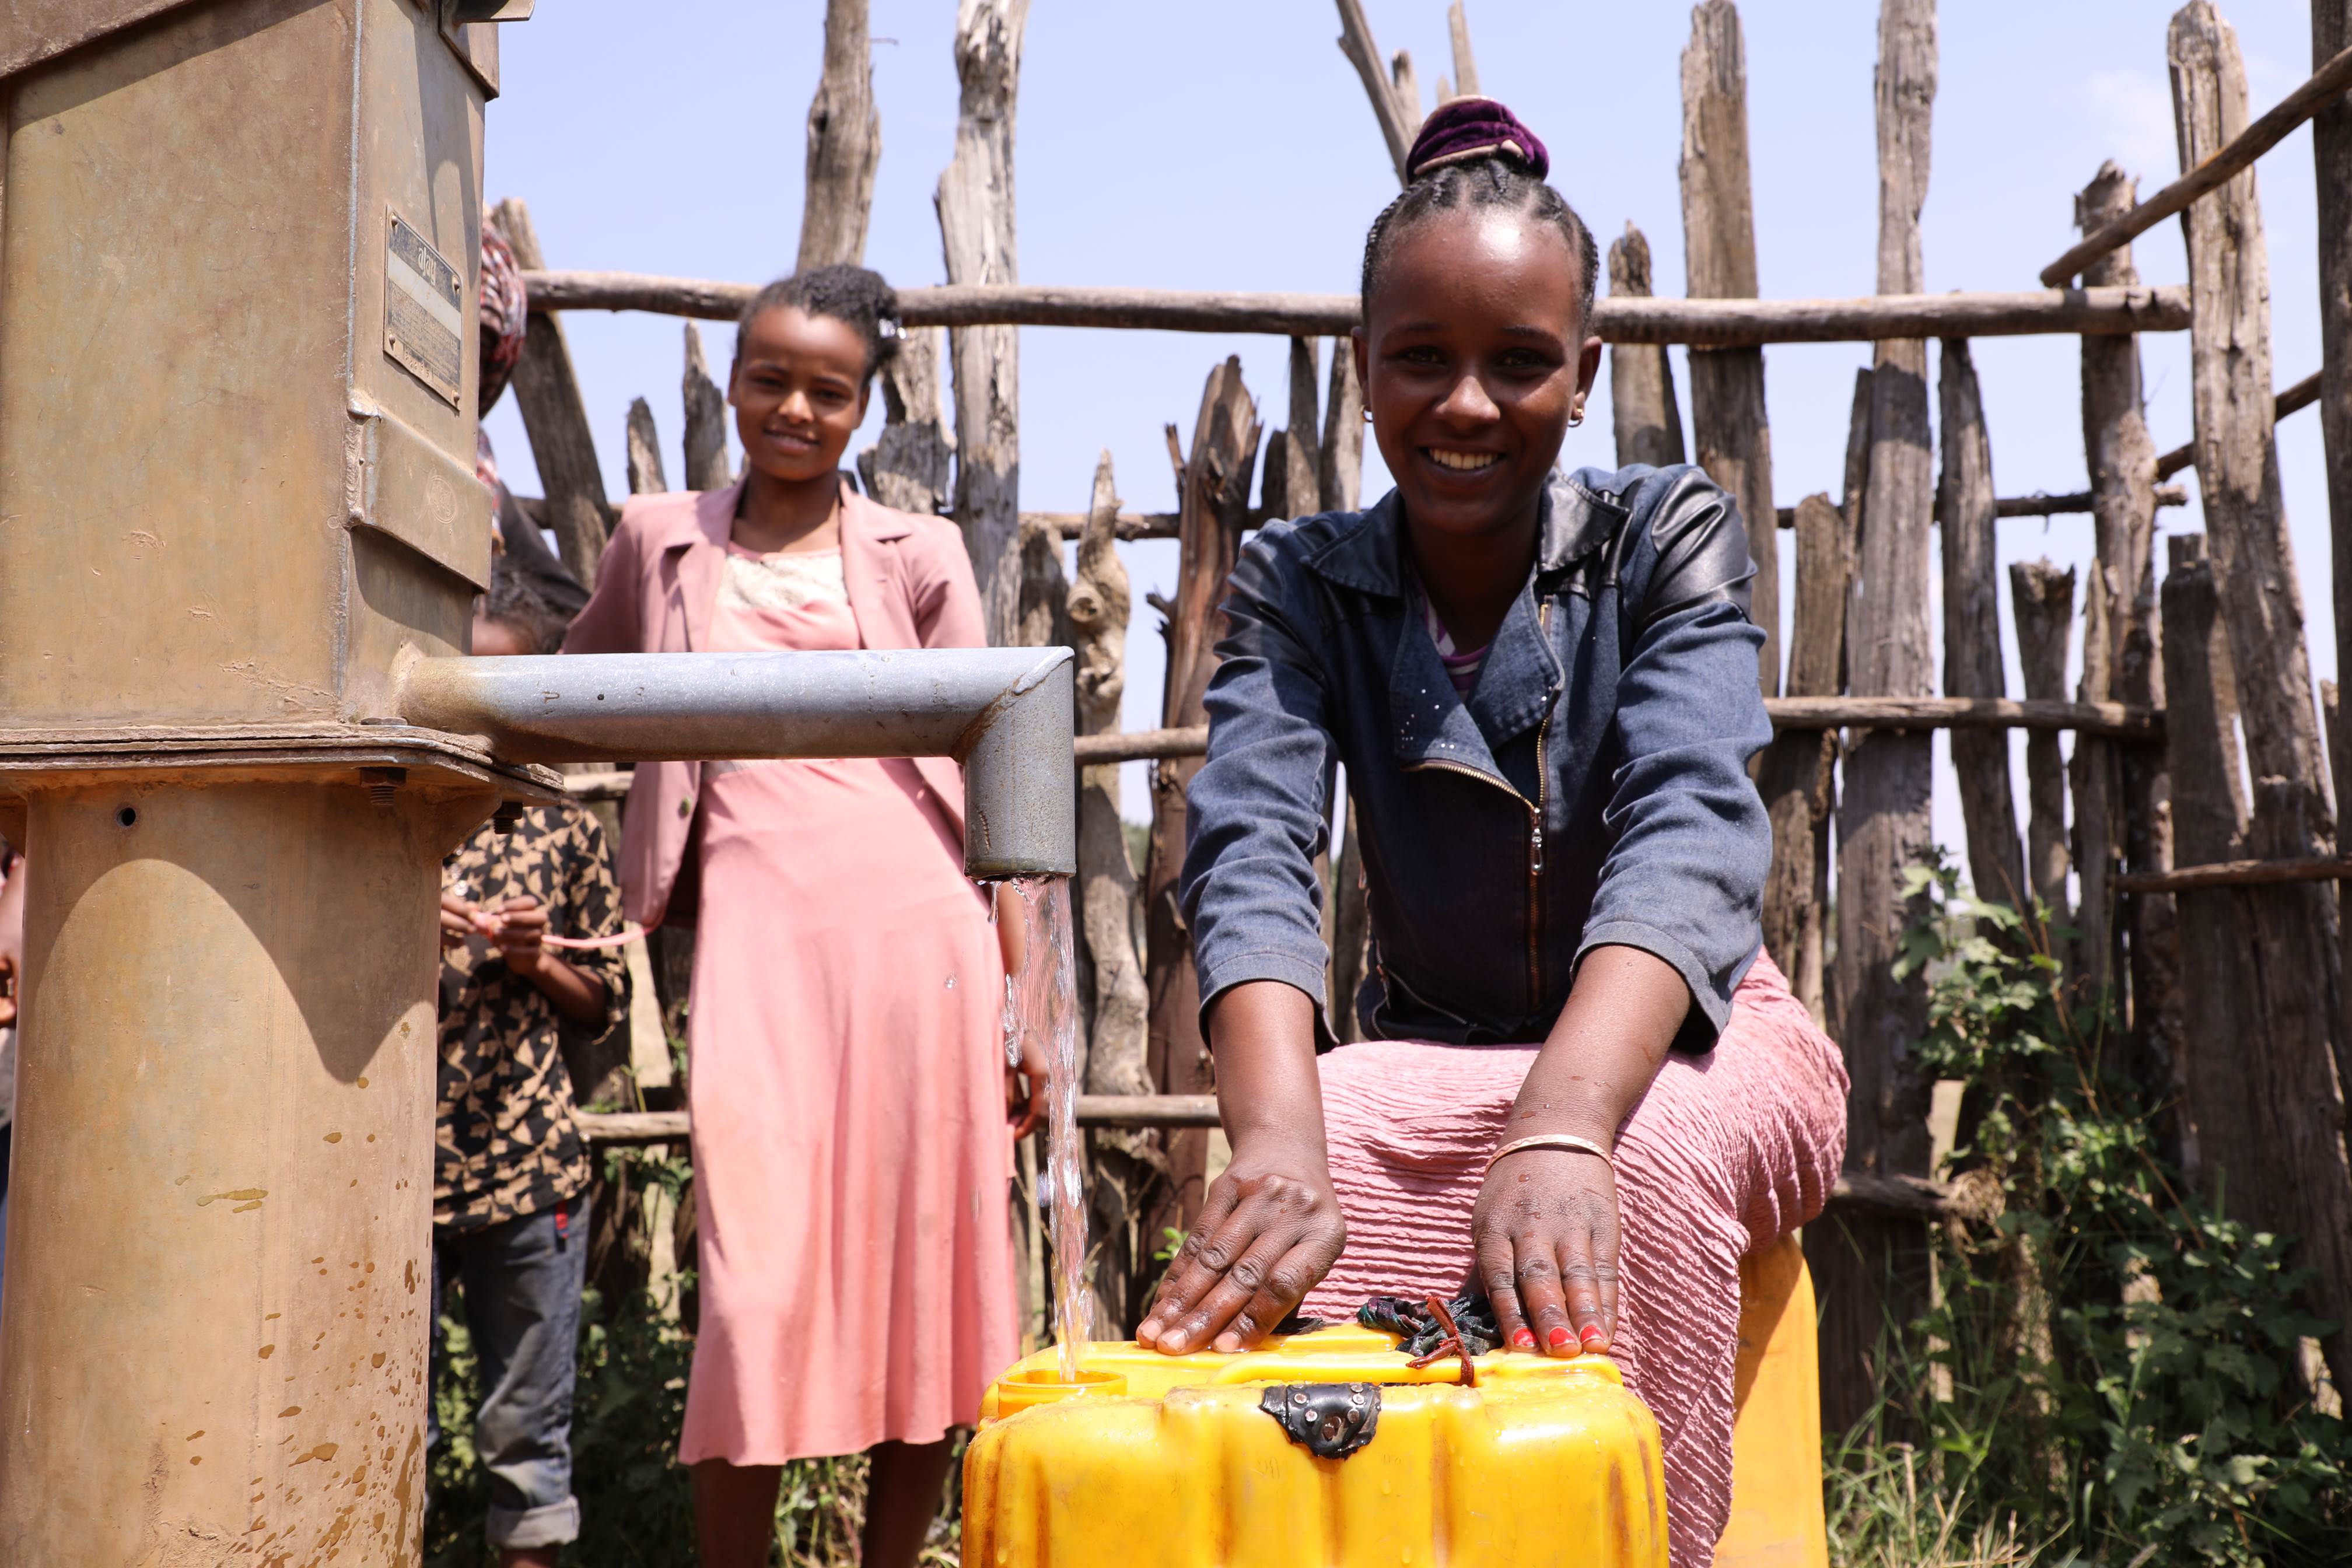 Girl from Ethiopia pours water from public tap into a yellow tub to take home